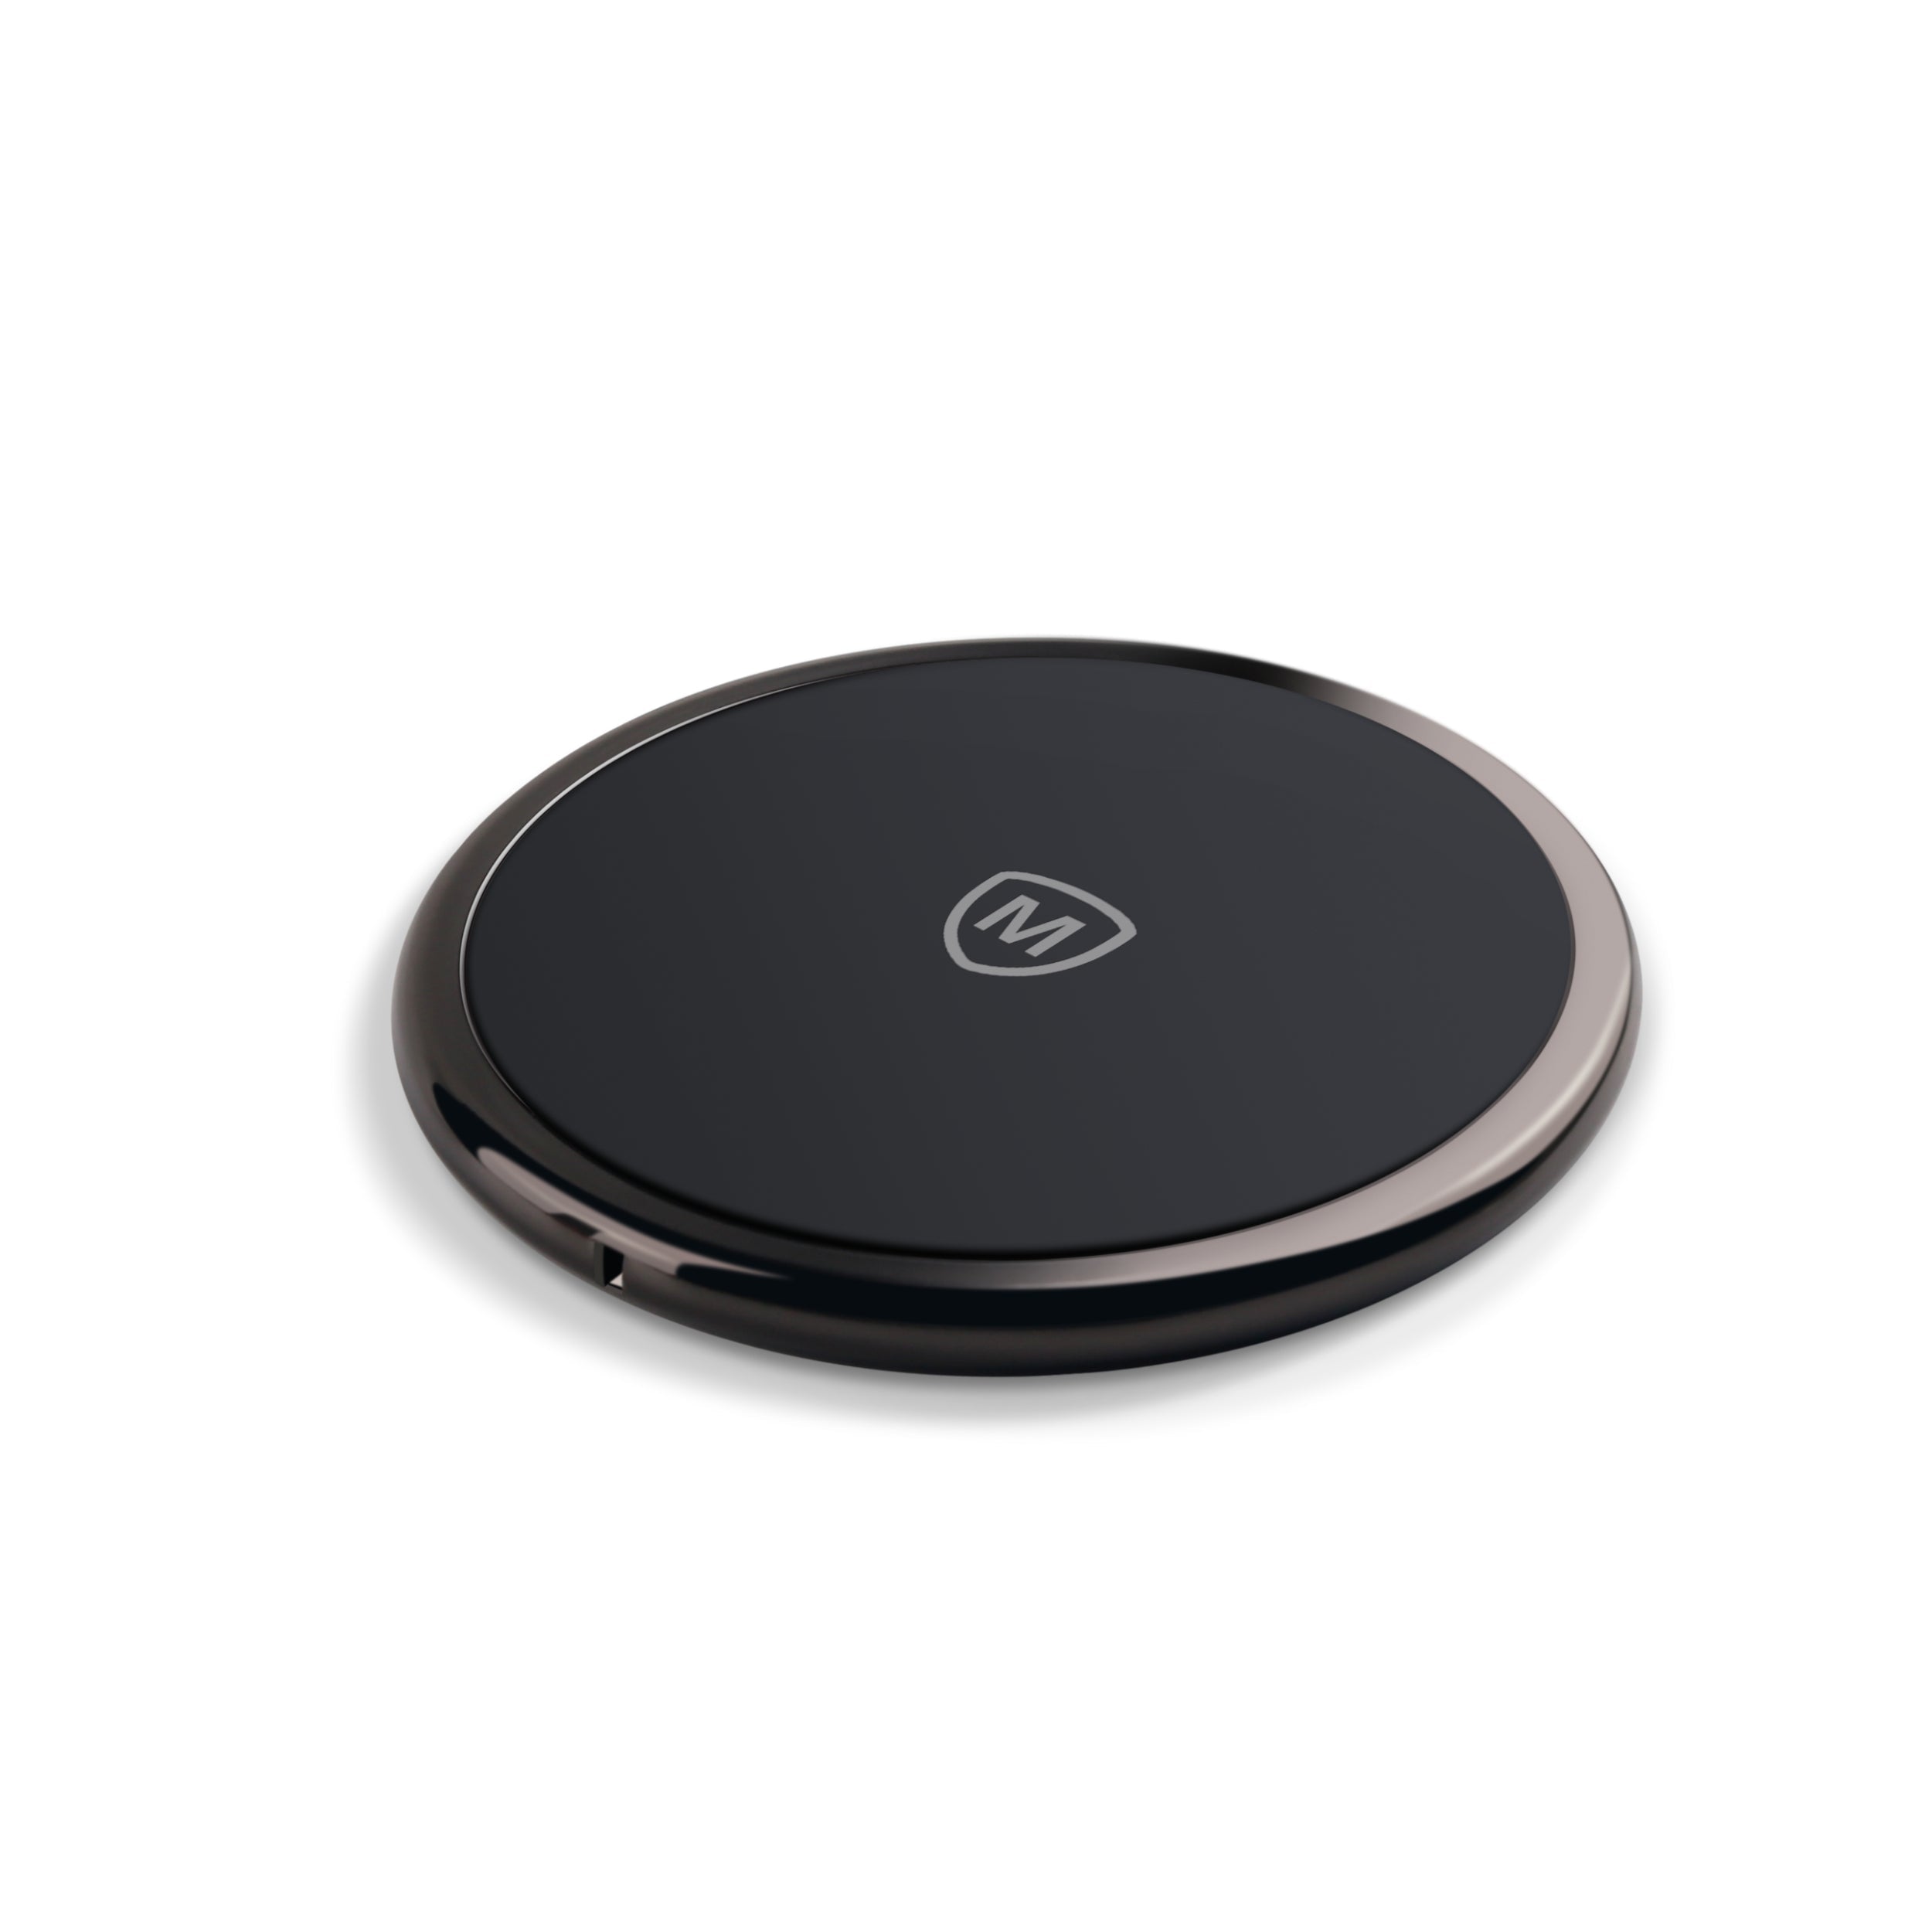 Supply Wireless Charger Pad Wholesale Fast Charger MICROPACK WCP-10PD